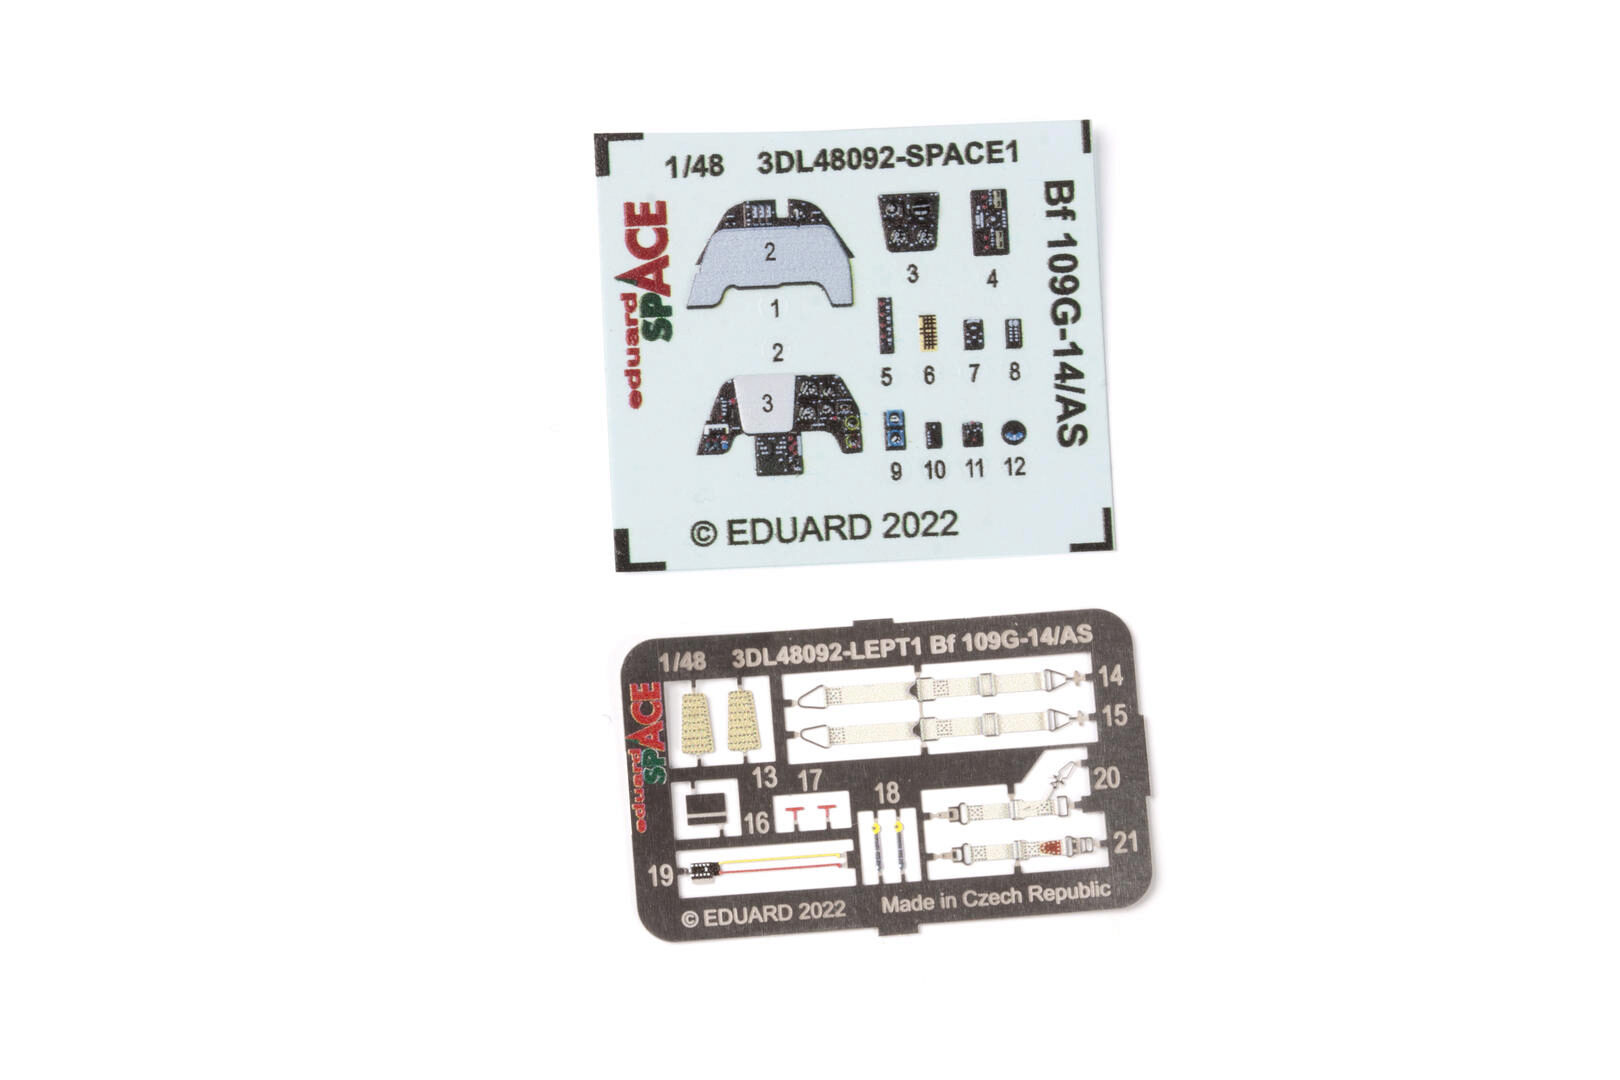 Eduard Accessories 3DL48092 Bf 109G-14/AS SPACE for EDUARD